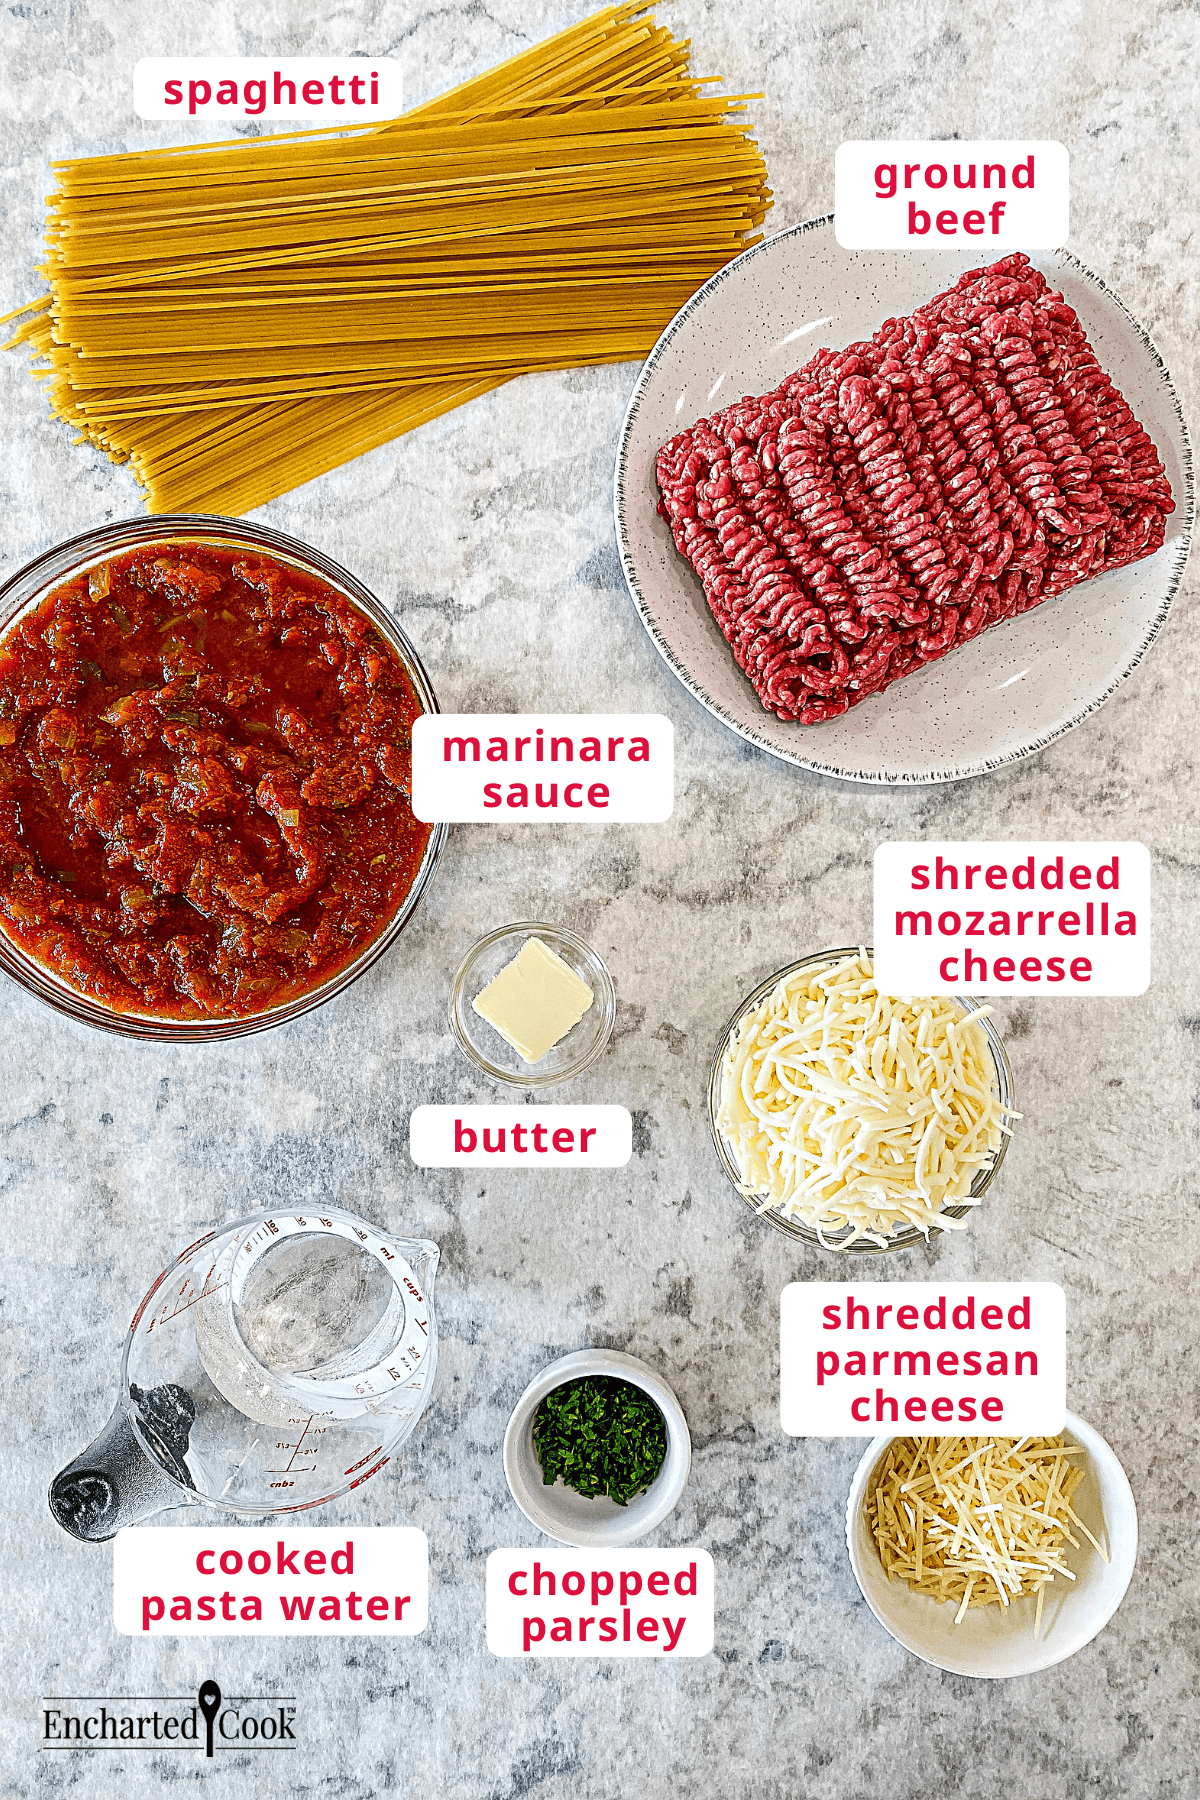 The ingredients, clockwise from top left: spaghetti, ground beef, shredded mozzarella cheese, shredded parmesan cheese, chopped parsley, cooked pasta water, butter, and marinara sauce.